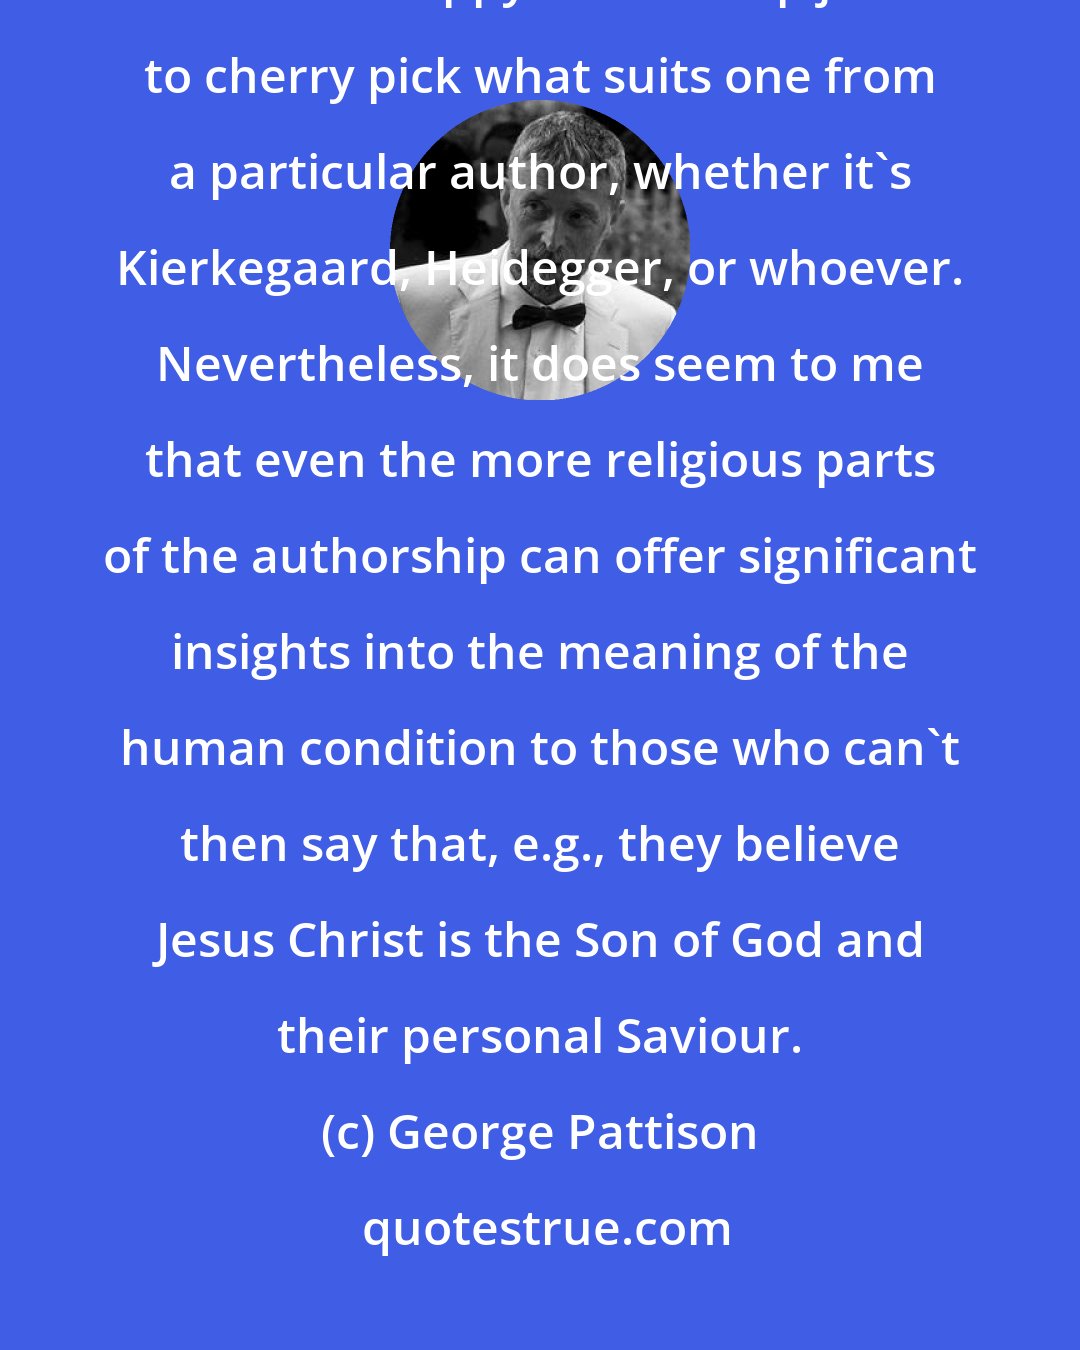 George Pattison: Of course, if one's reading Kierkegaard for personal interest that's fine - but it's sloppy scholarship just to cherry pick what suits one from a particular author, whether it's Kierkegaard, Heidegger, or whoever. Nevertheless, it does seem to me that even the more religious parts of the authorship can offer significant insights into the meaning of the human condition to those who can't then say that, e.g., they believe Jesus Christ is the Son of God and their personal Saviour.